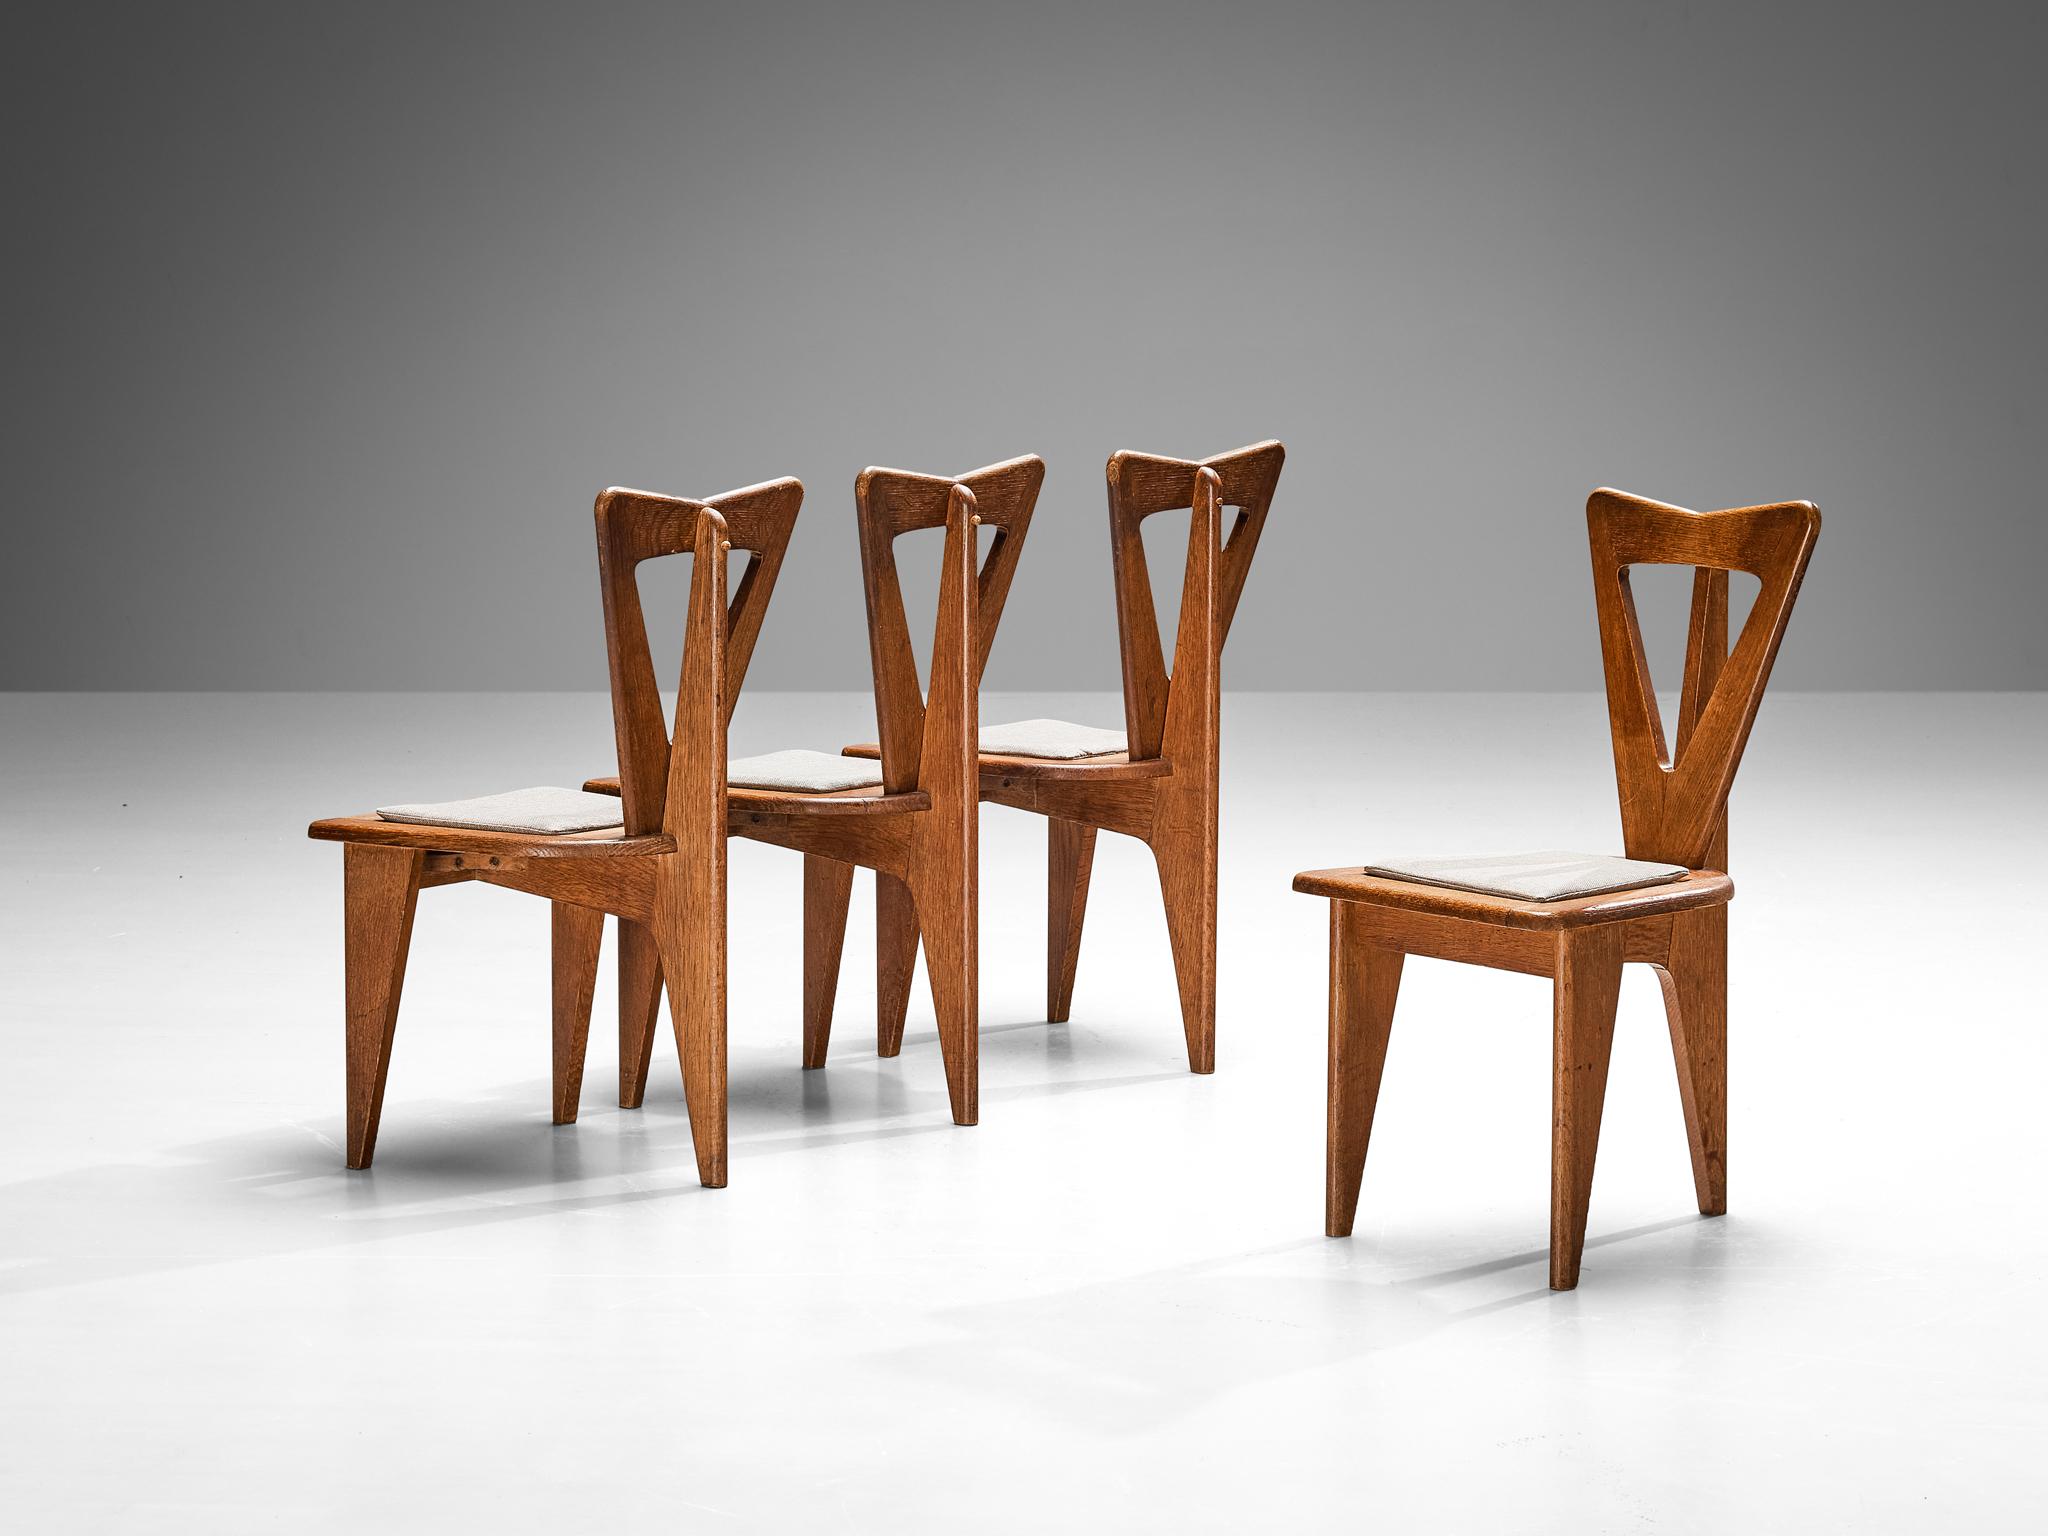 Set of four dining chairs, oak, fabric, France, 1950s

Captivating in both form and material usage, these French dining chairs resonate with the design principles that were prevalent during the 1950s and 1960s. These chairs share a design ethos akin